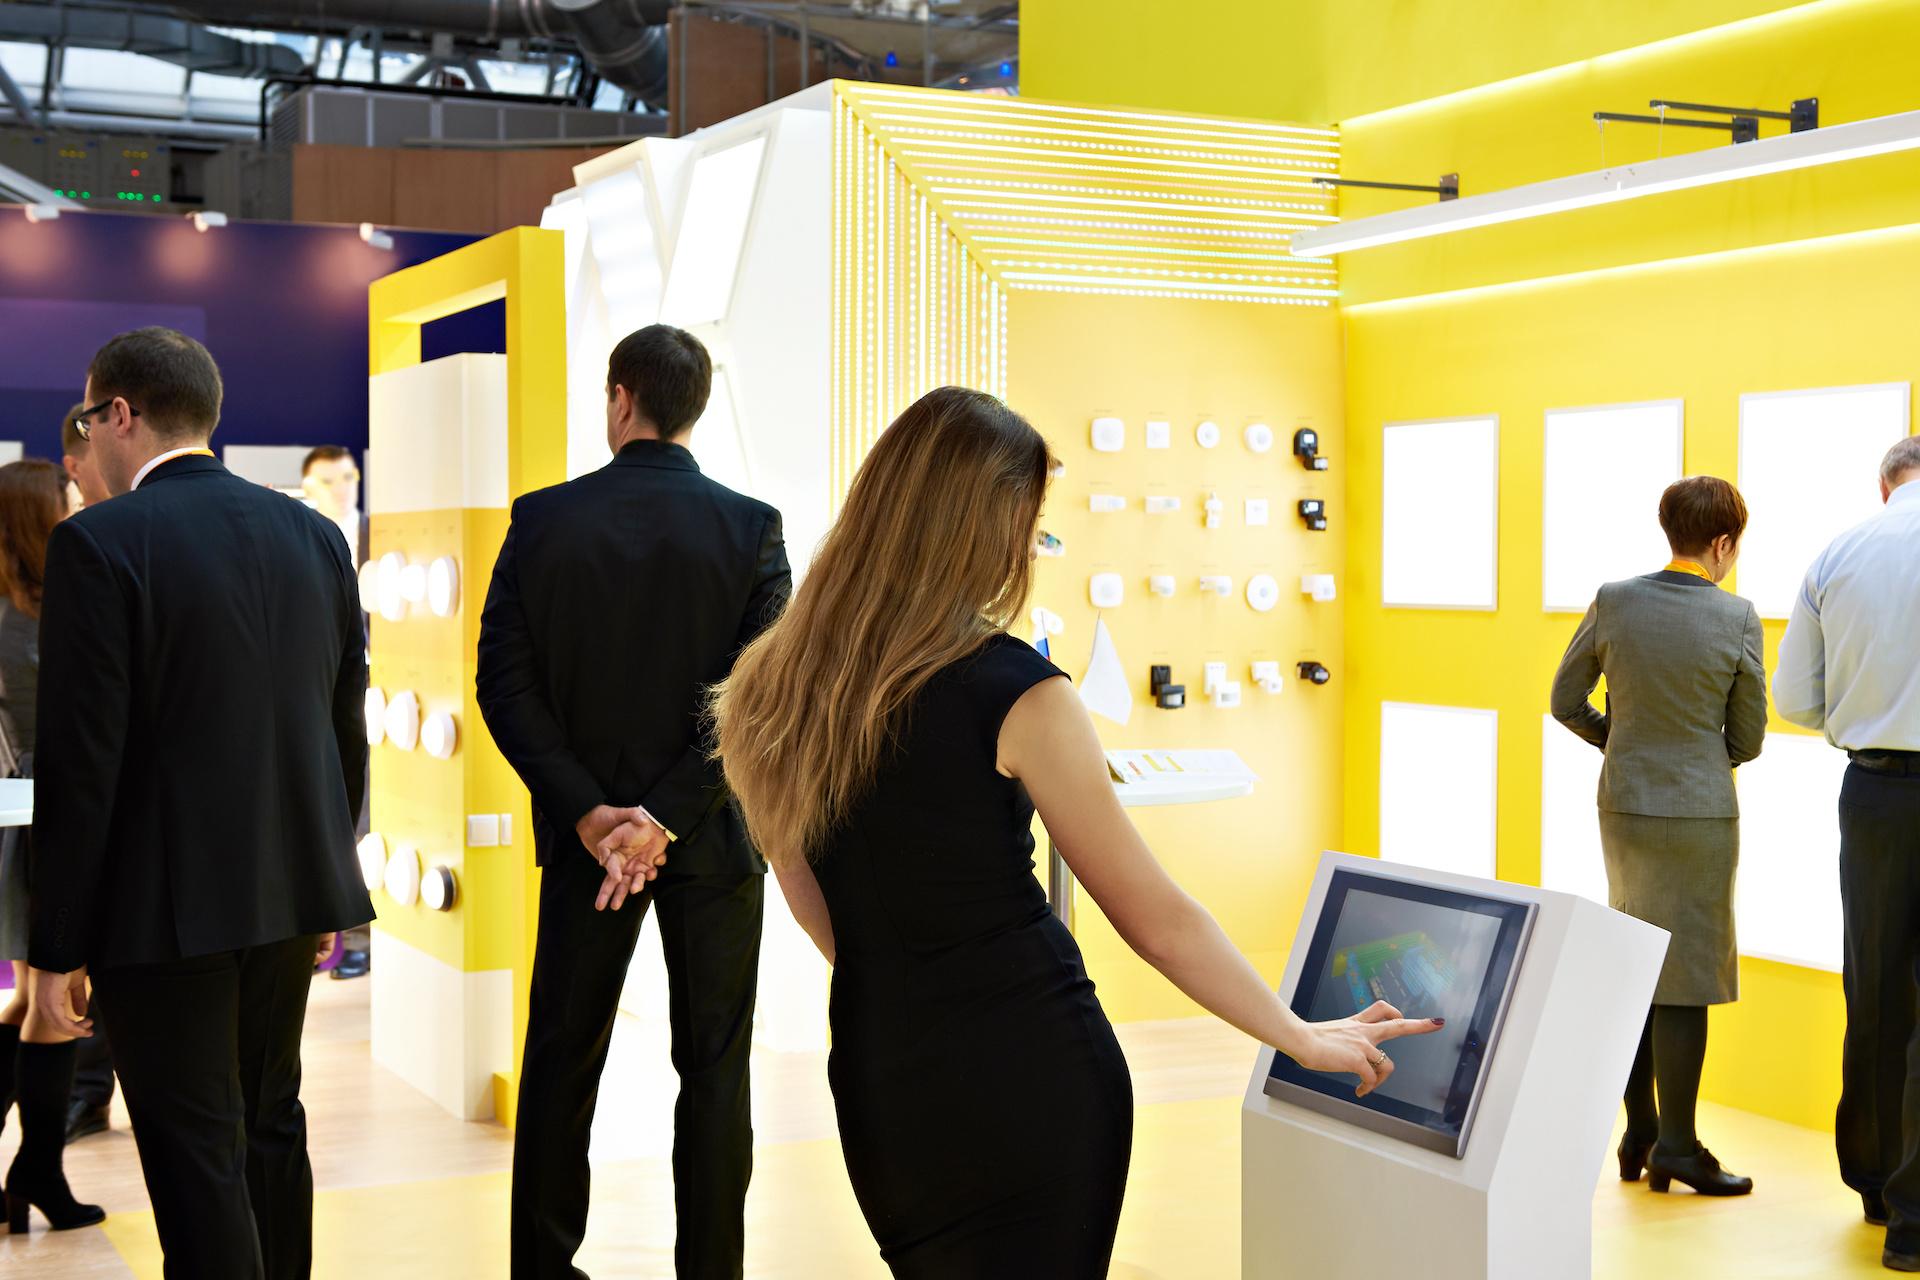 Image of exhibition stand with bright colours and good lighting